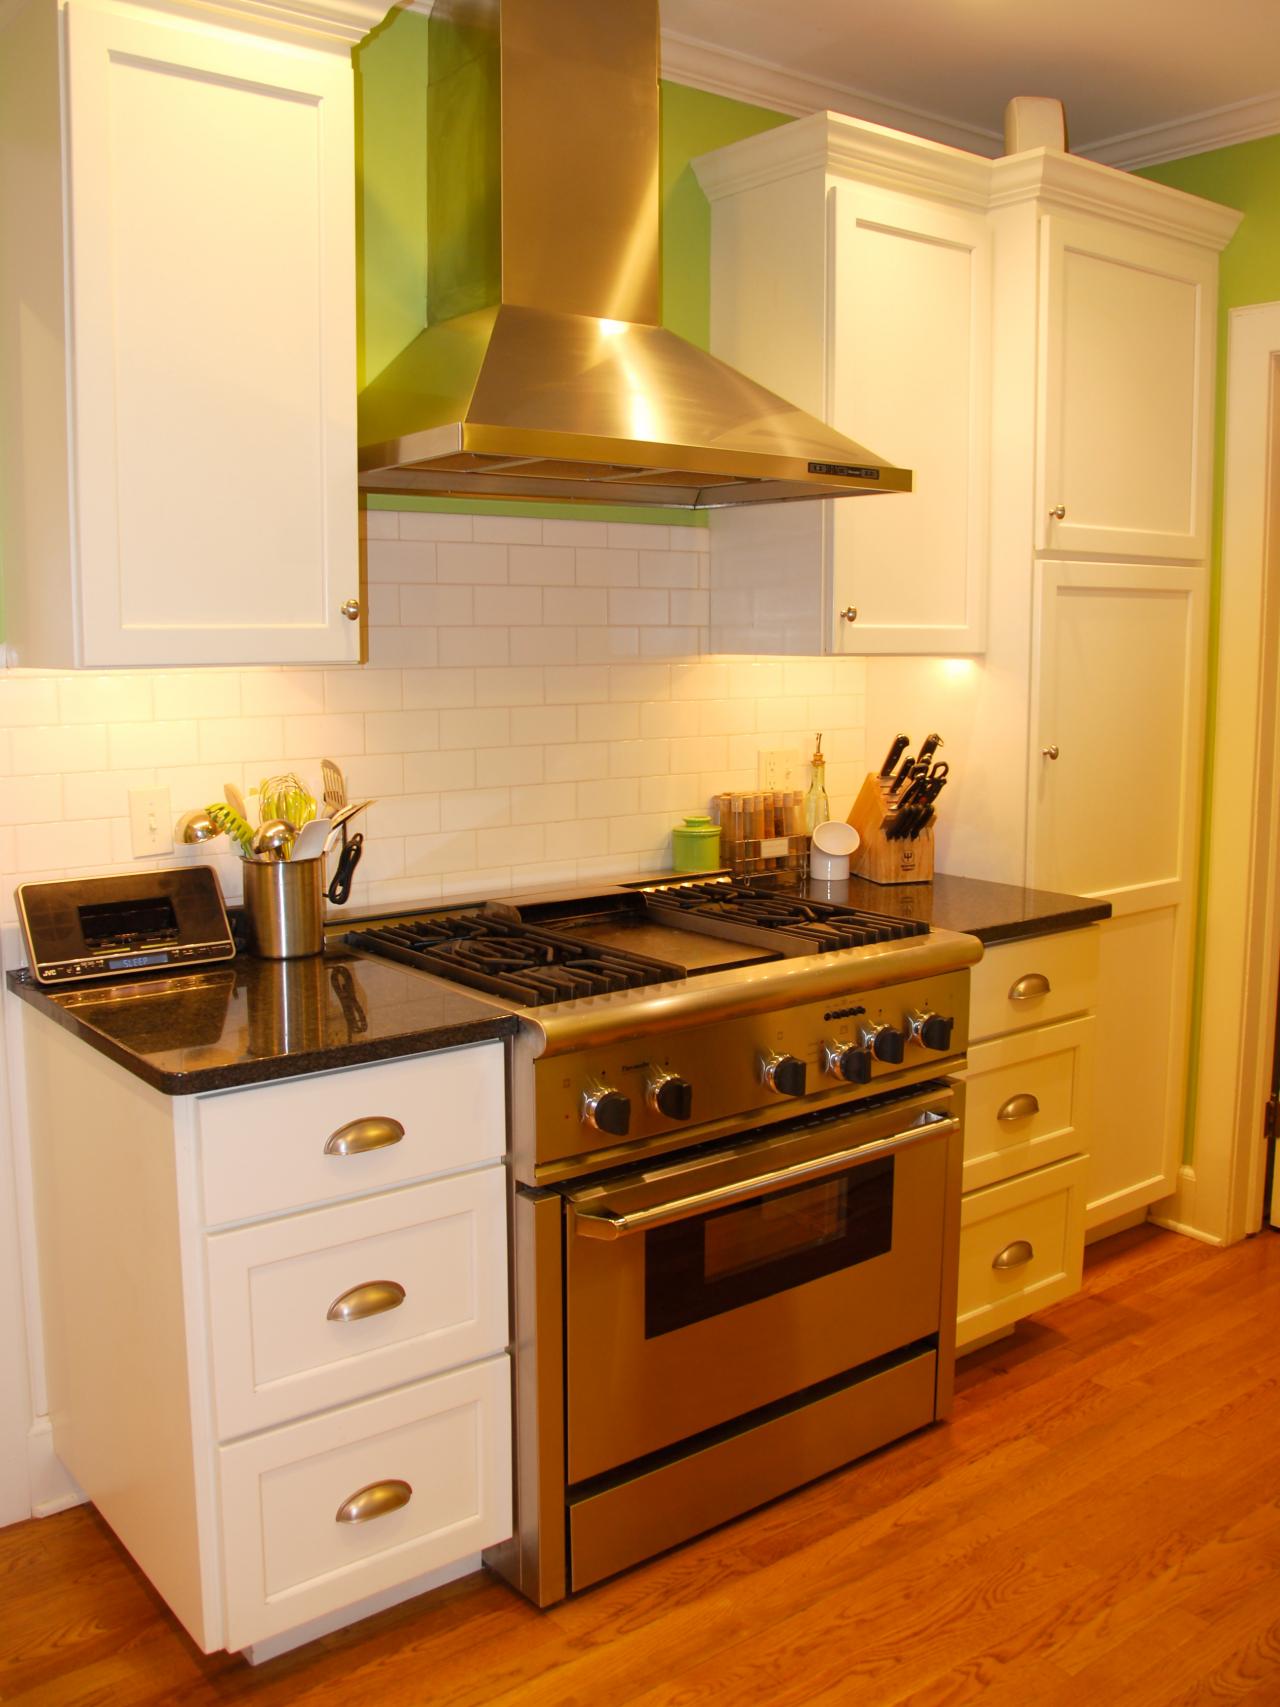 Small Eat-In Kitchen Ideas: Pictures & Tips From HGTV | HGTV